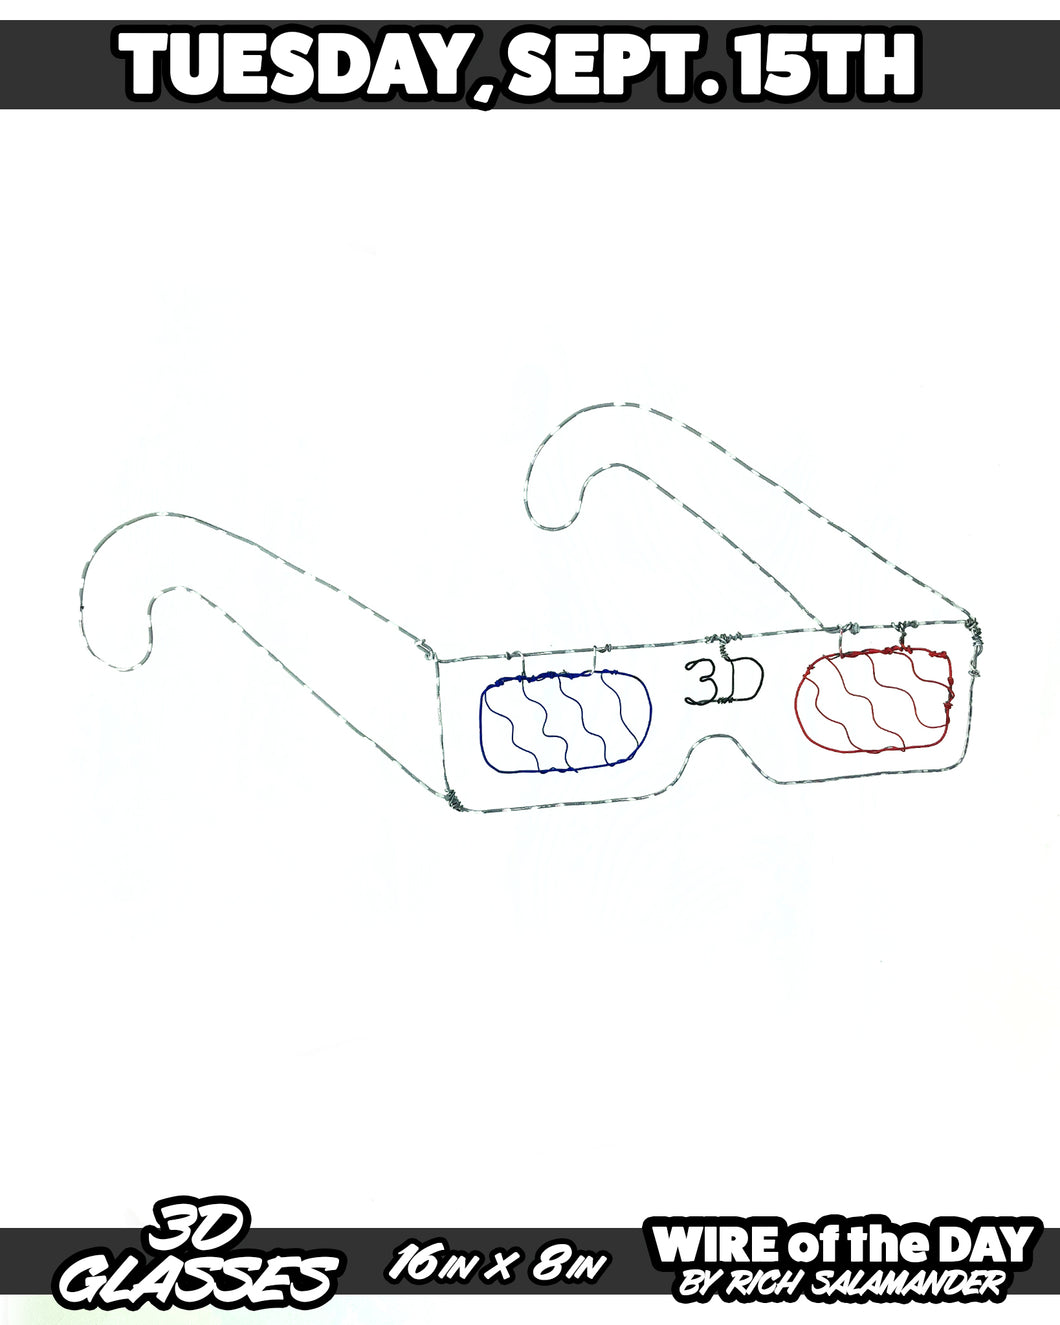 WIRE of the DAY 3D GLASSES